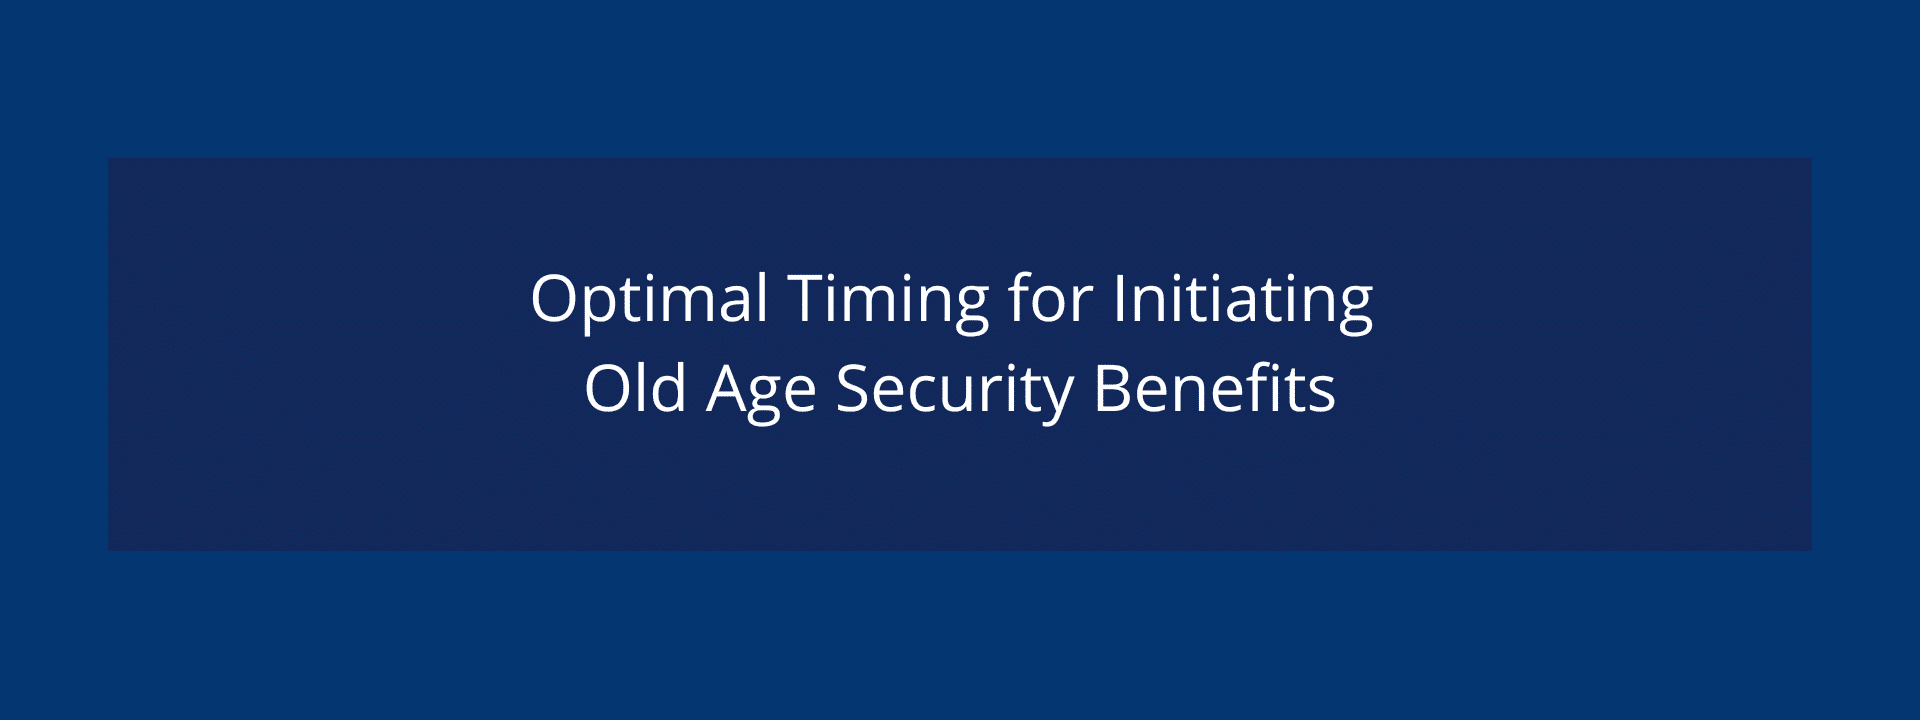 Optimal Timing for Old Age Security Benefits